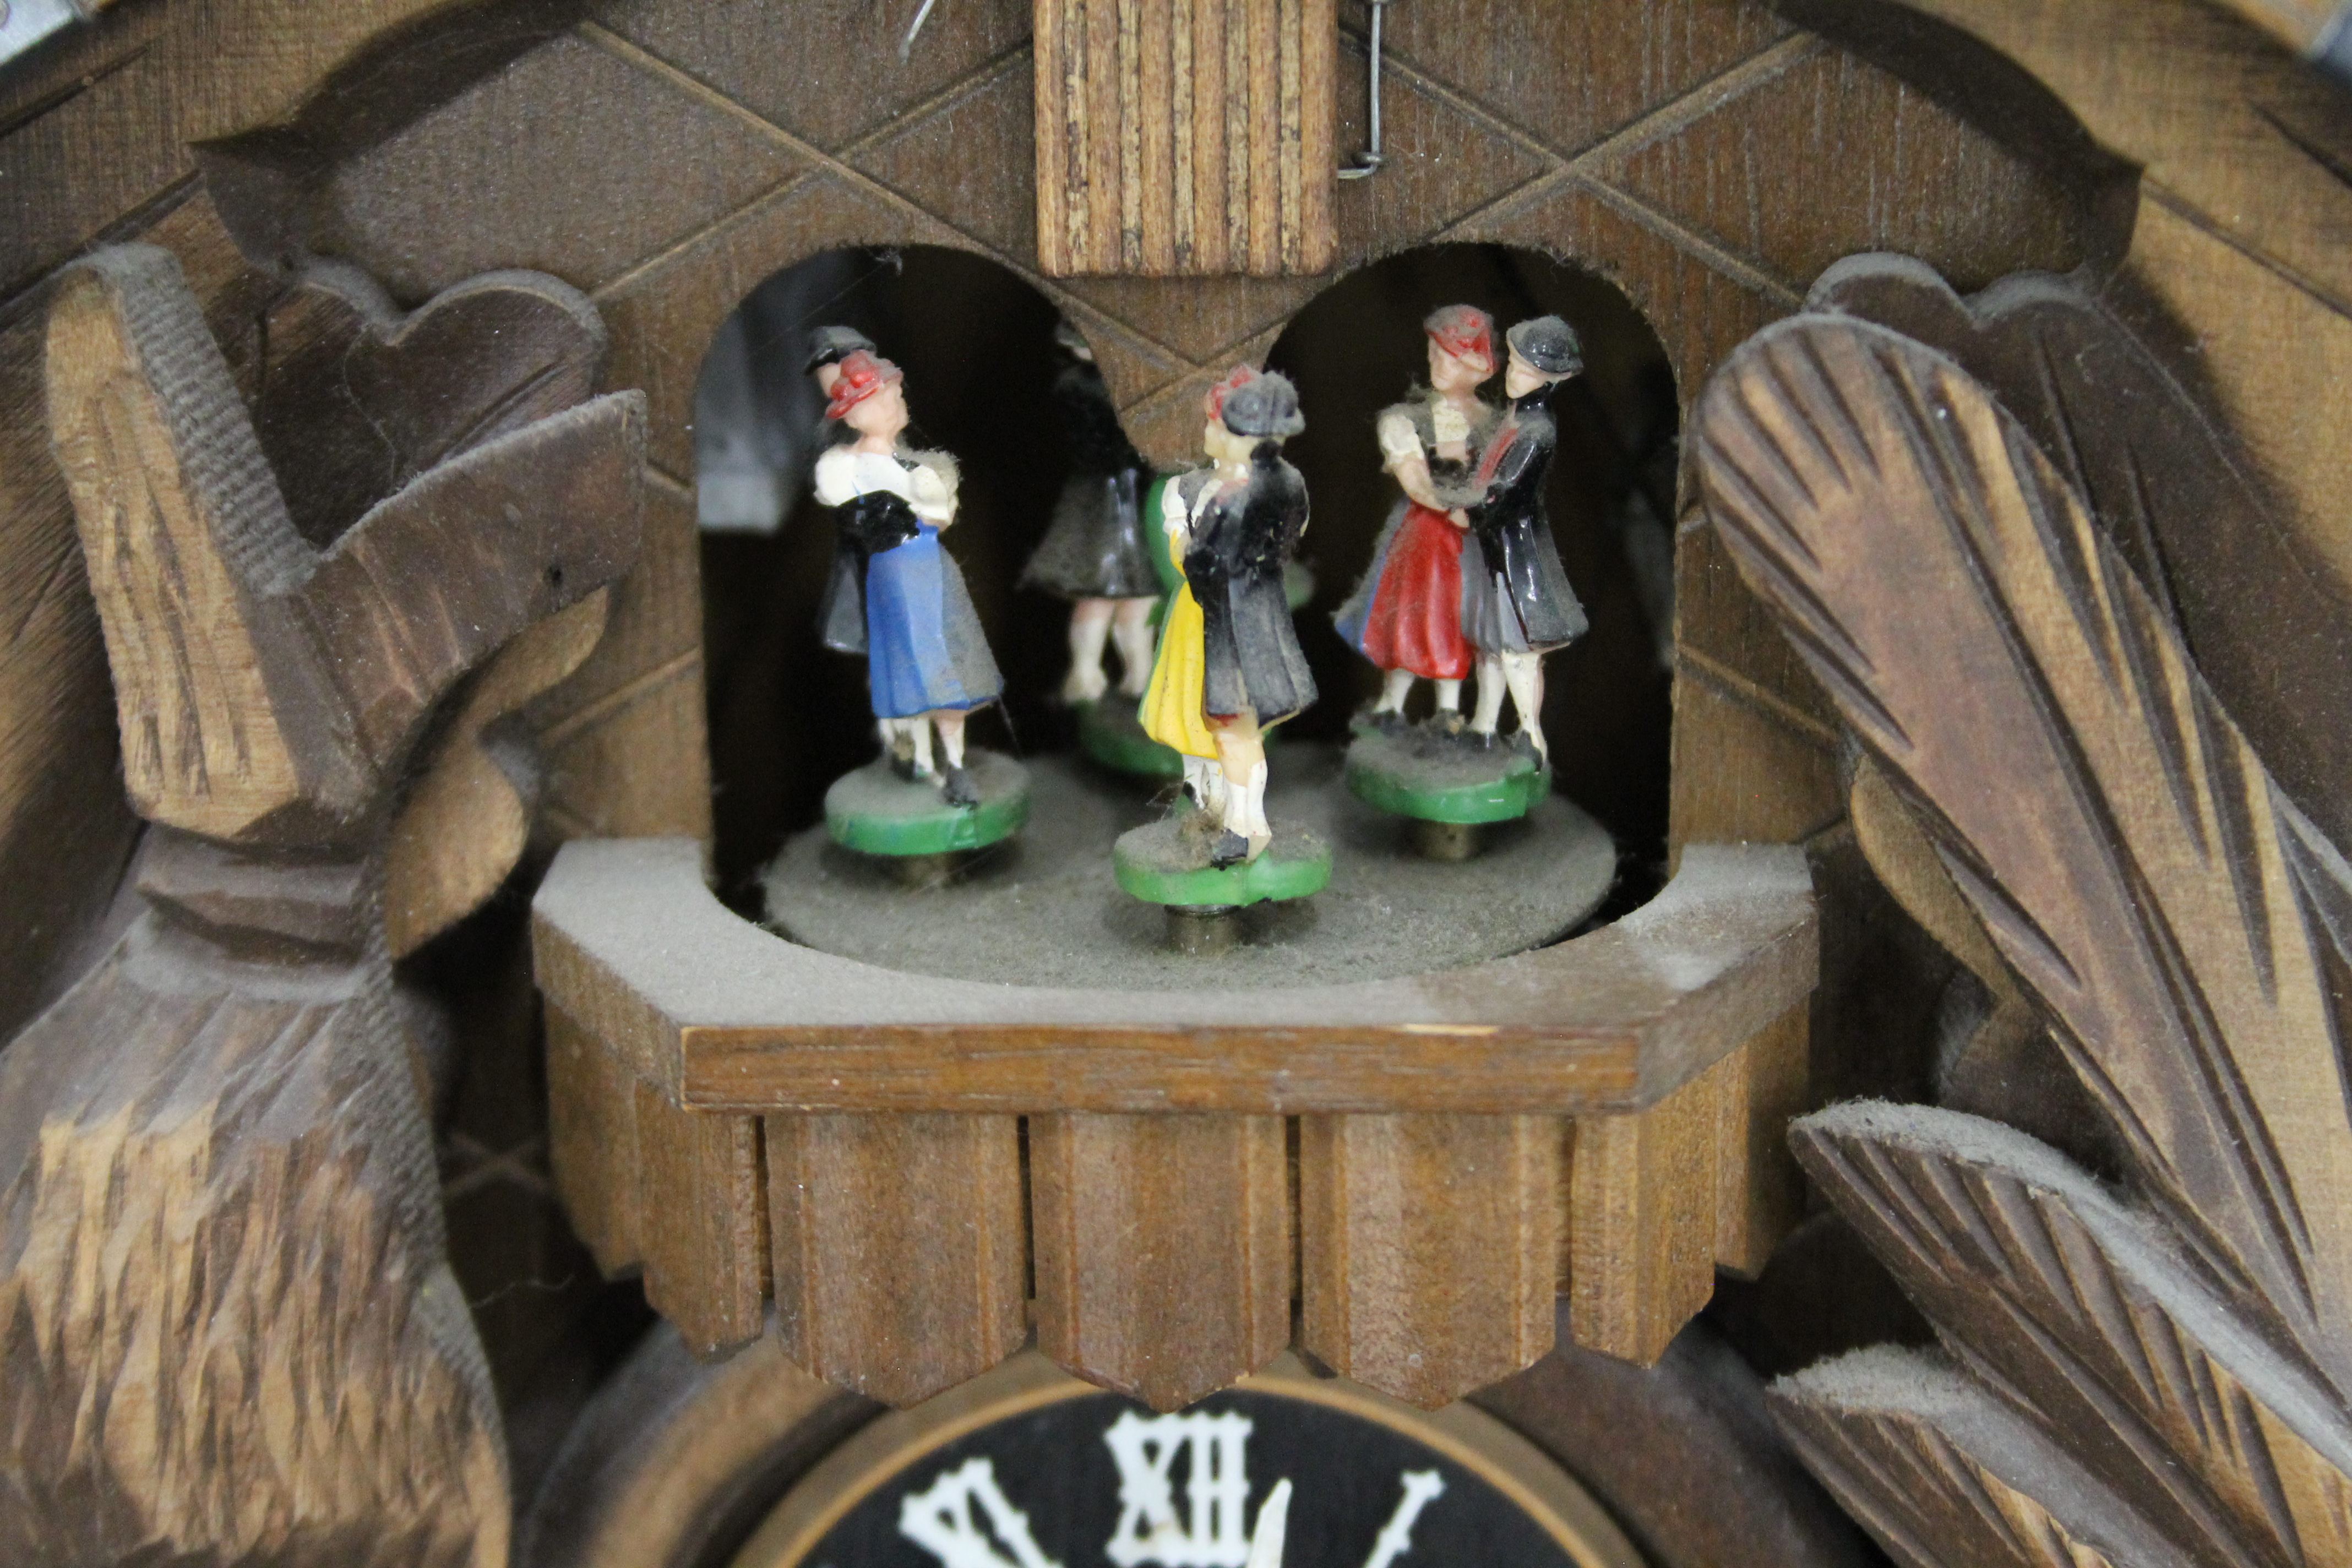 A Blackforest cuckoo clock with roundabout. Approximately 49 cm high. - Image 4 of 9